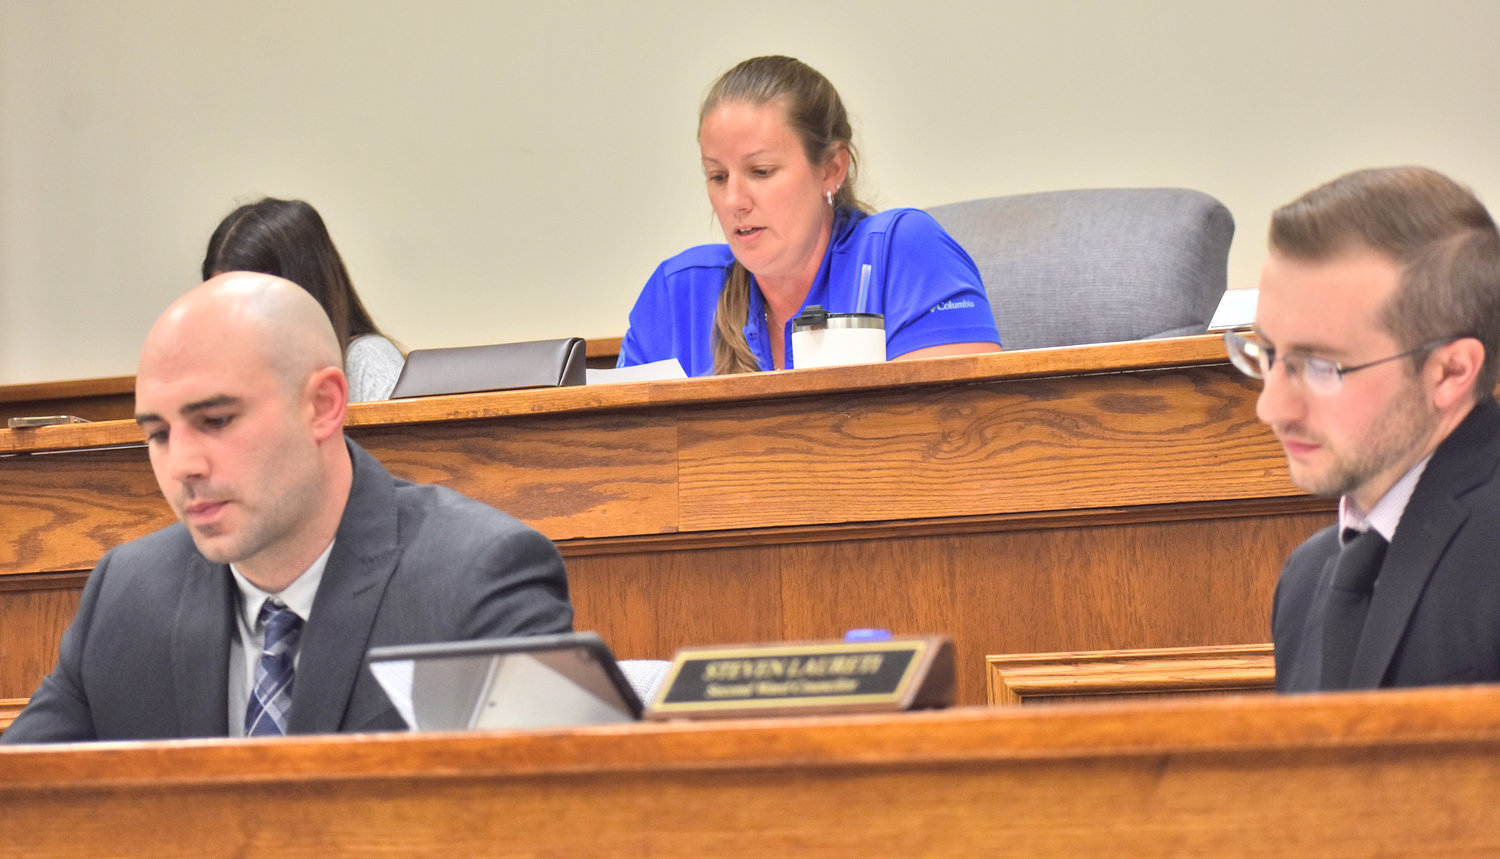 Deputy Mayor Michelle Kinville reads a statement on behalf of the council regarding a vote on whether to allow the Oneida City Police Department to provide the Oneida City School District with a school resource officer. (Sentinel photo by Carly Stone)